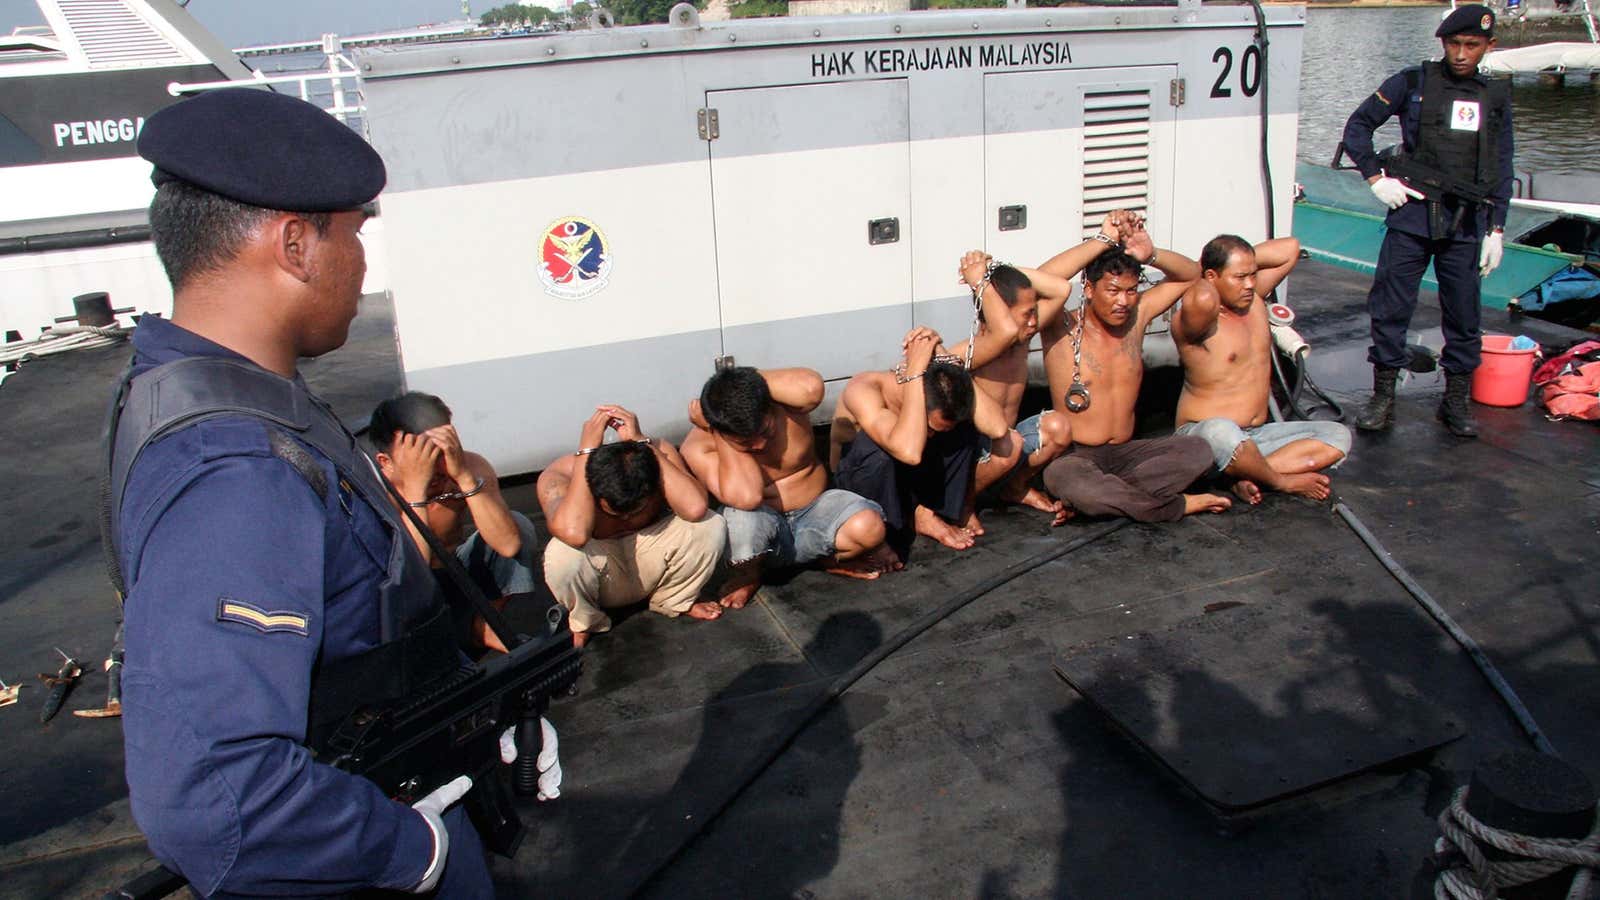 No pirates have been arrested yet in this current wave of attacks, but these Indonesian pirates were arrested in 2011.